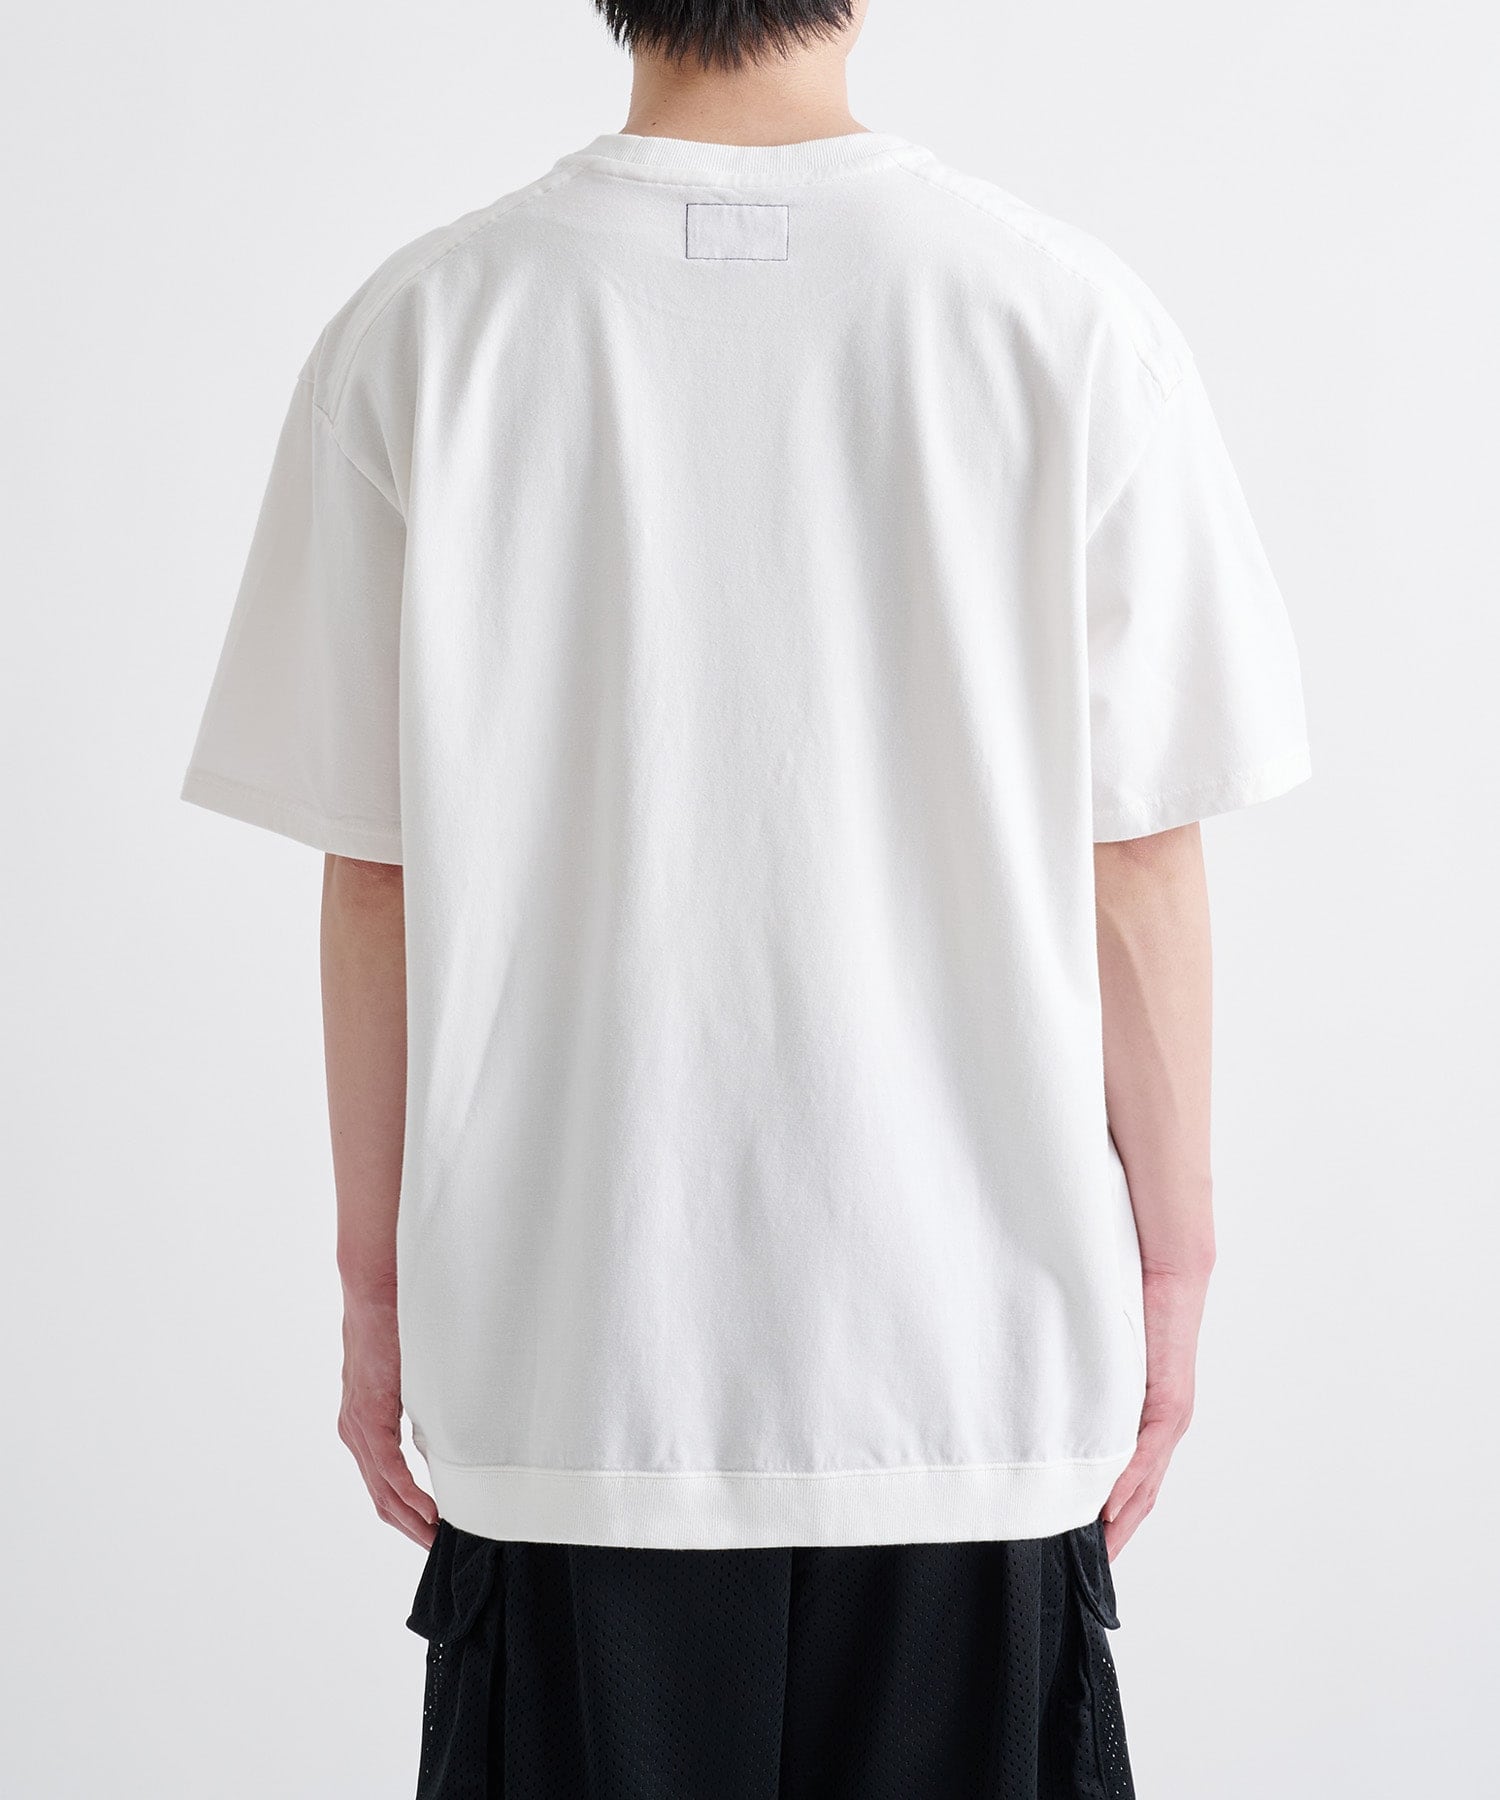 High Bulky Pocket Tee | THE NOUTH FACE | ノースフェイス